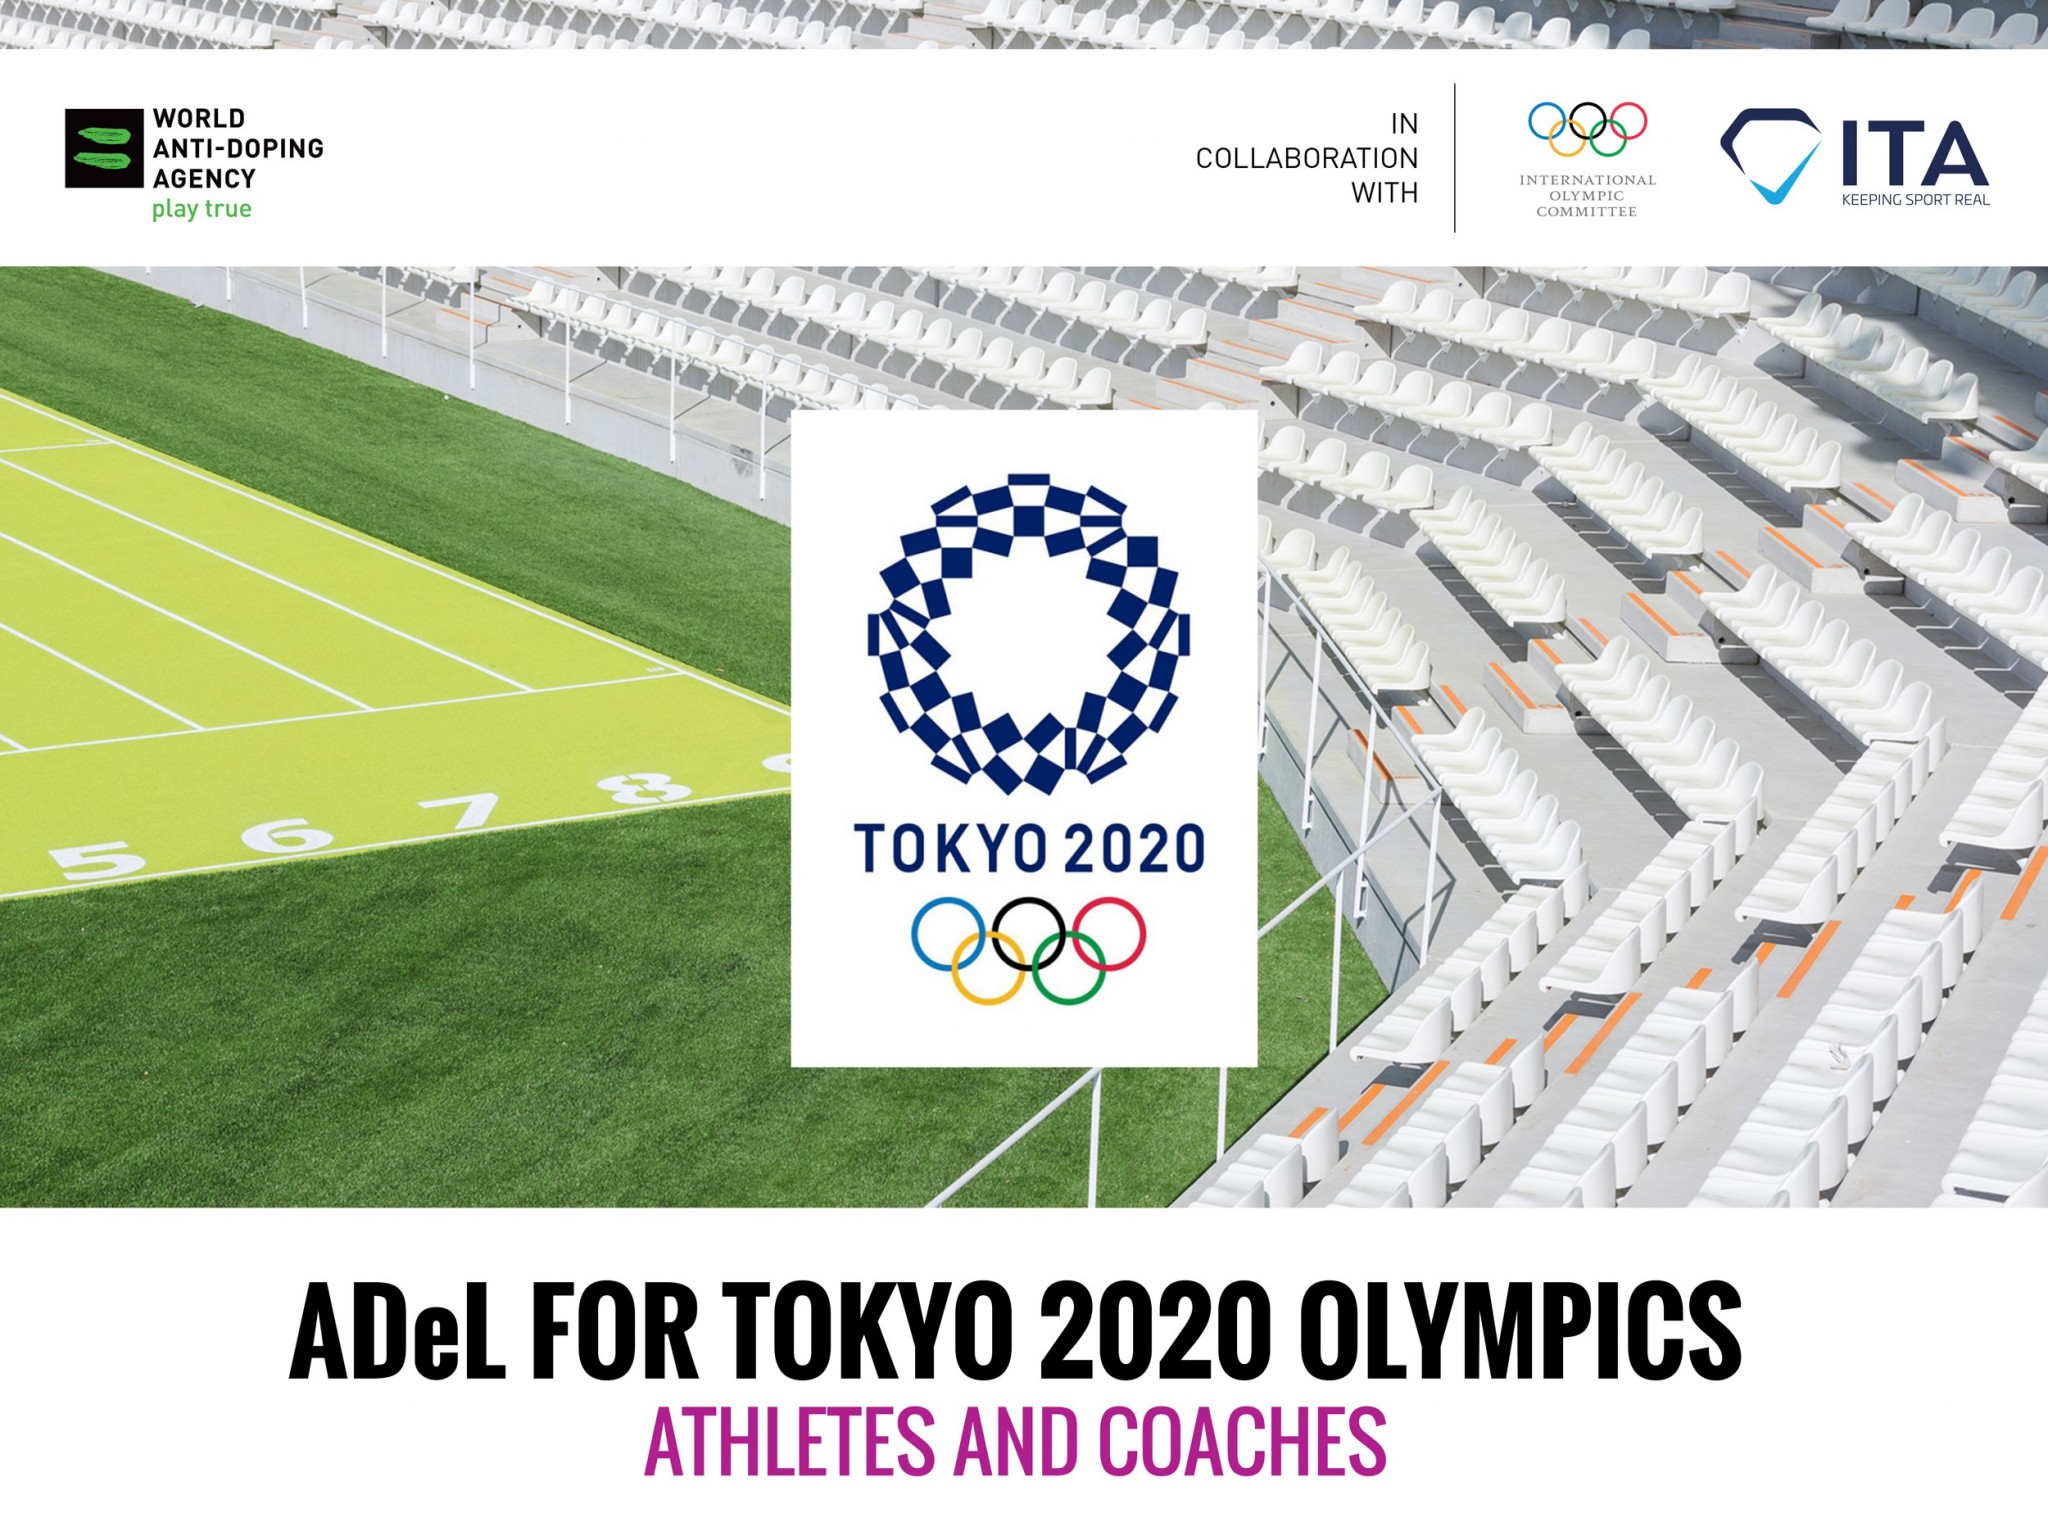 WADA has launched new interactive education course for athletes and coaches who are set to attend the postponed Tokyo 2020 Olympic Games ©WADA